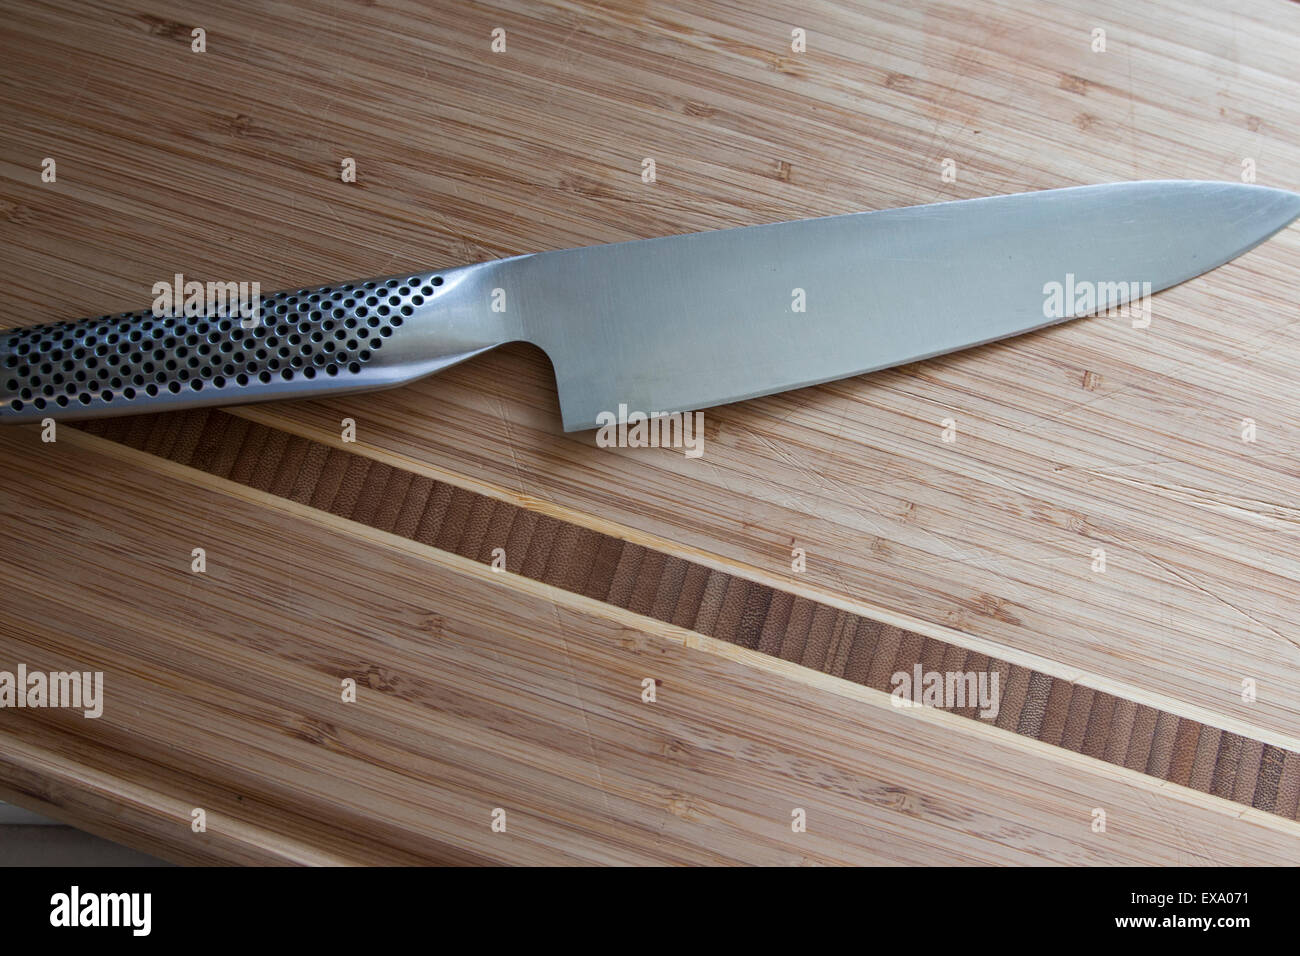 Chef's knife on a bamboo cutting board. Stock Photo